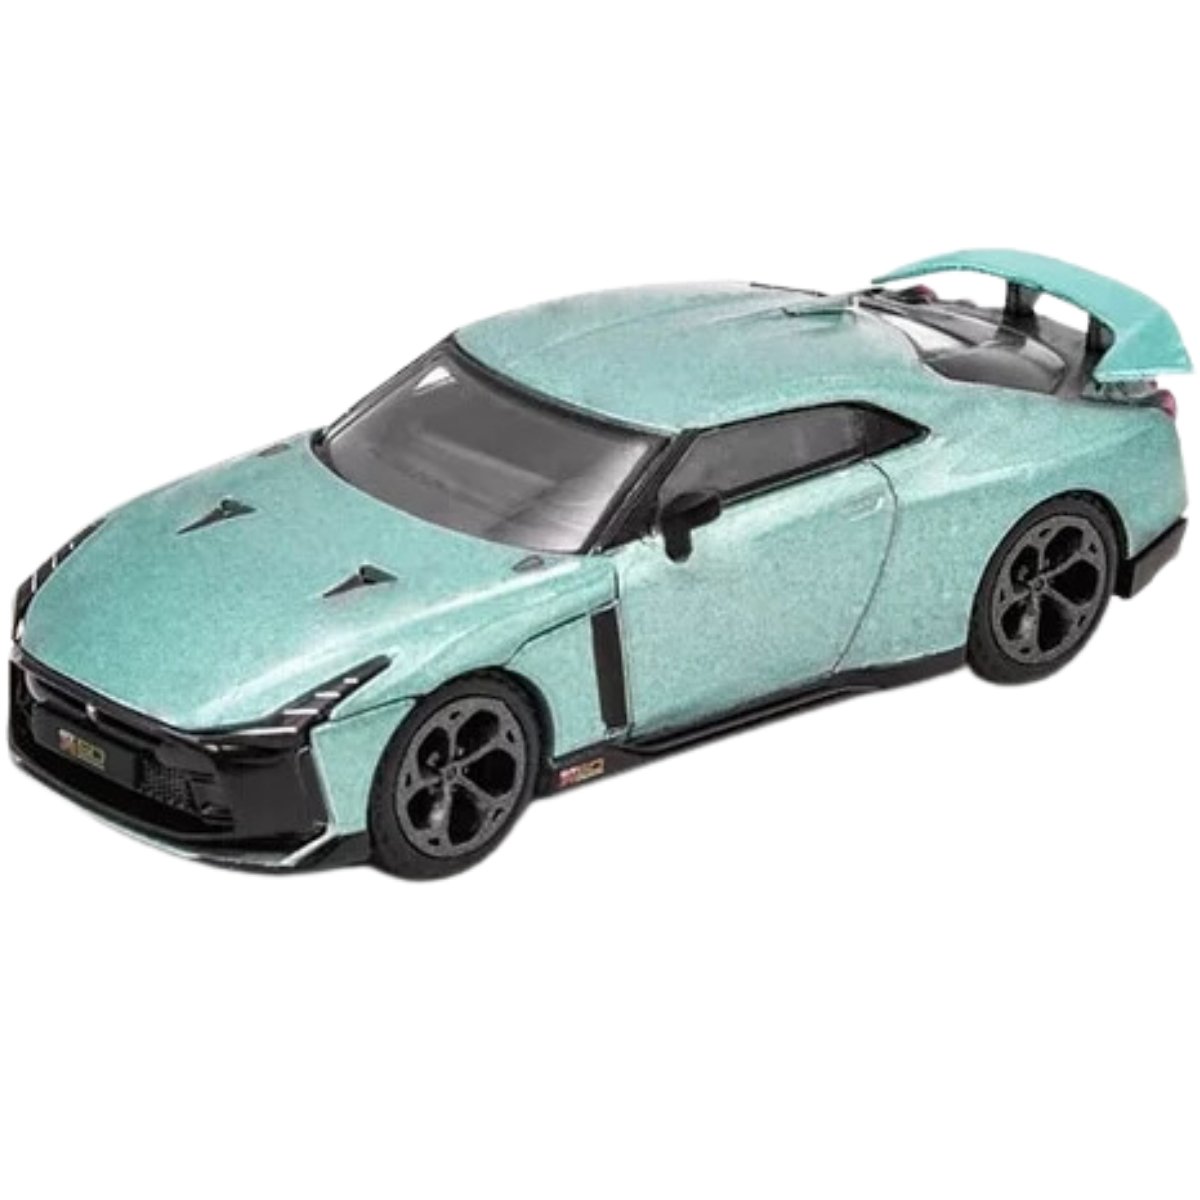 Era Car Nissan GT-R50 By Italdesign Production Version Pink Greenish (1:64 Scale)